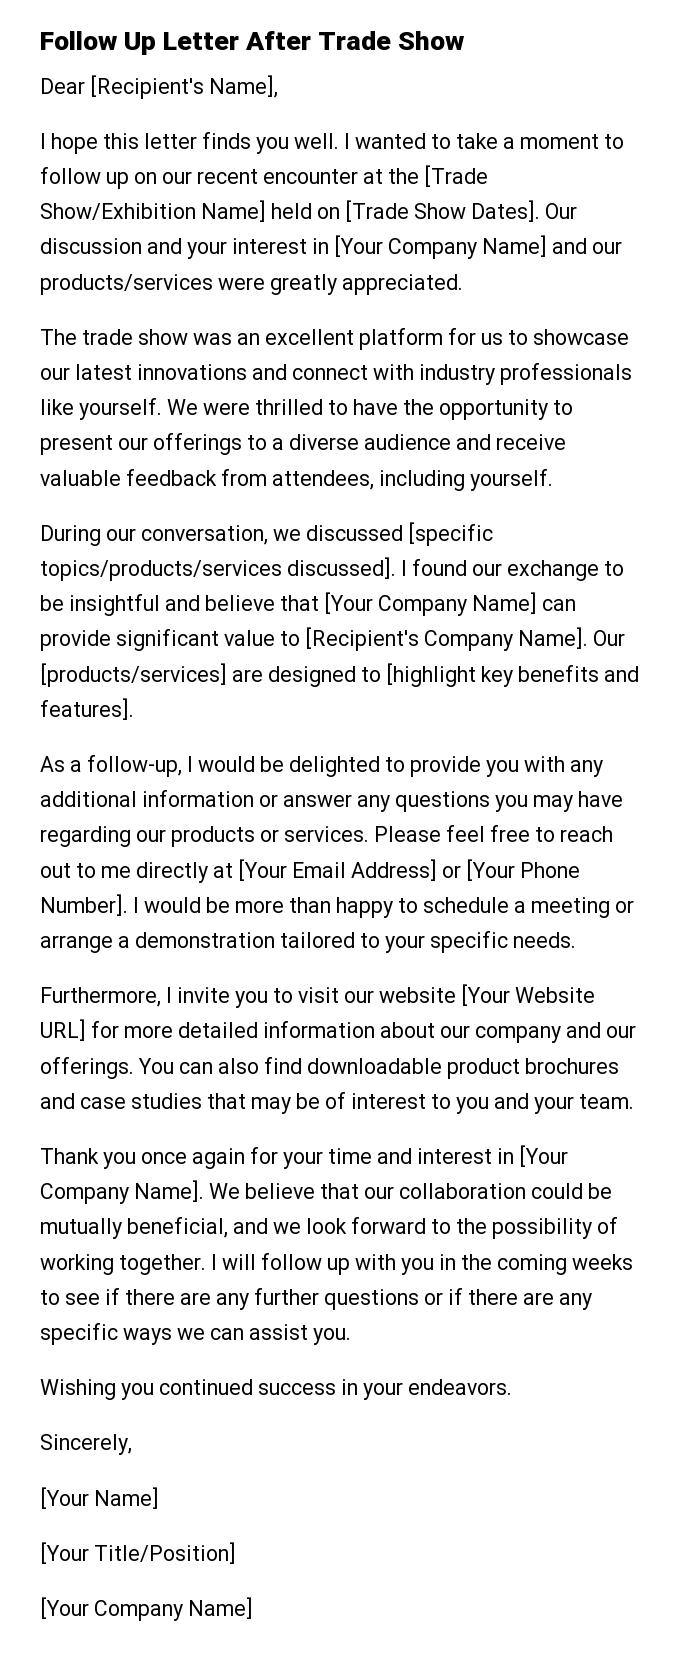 Follow Up Letter After Trade Show